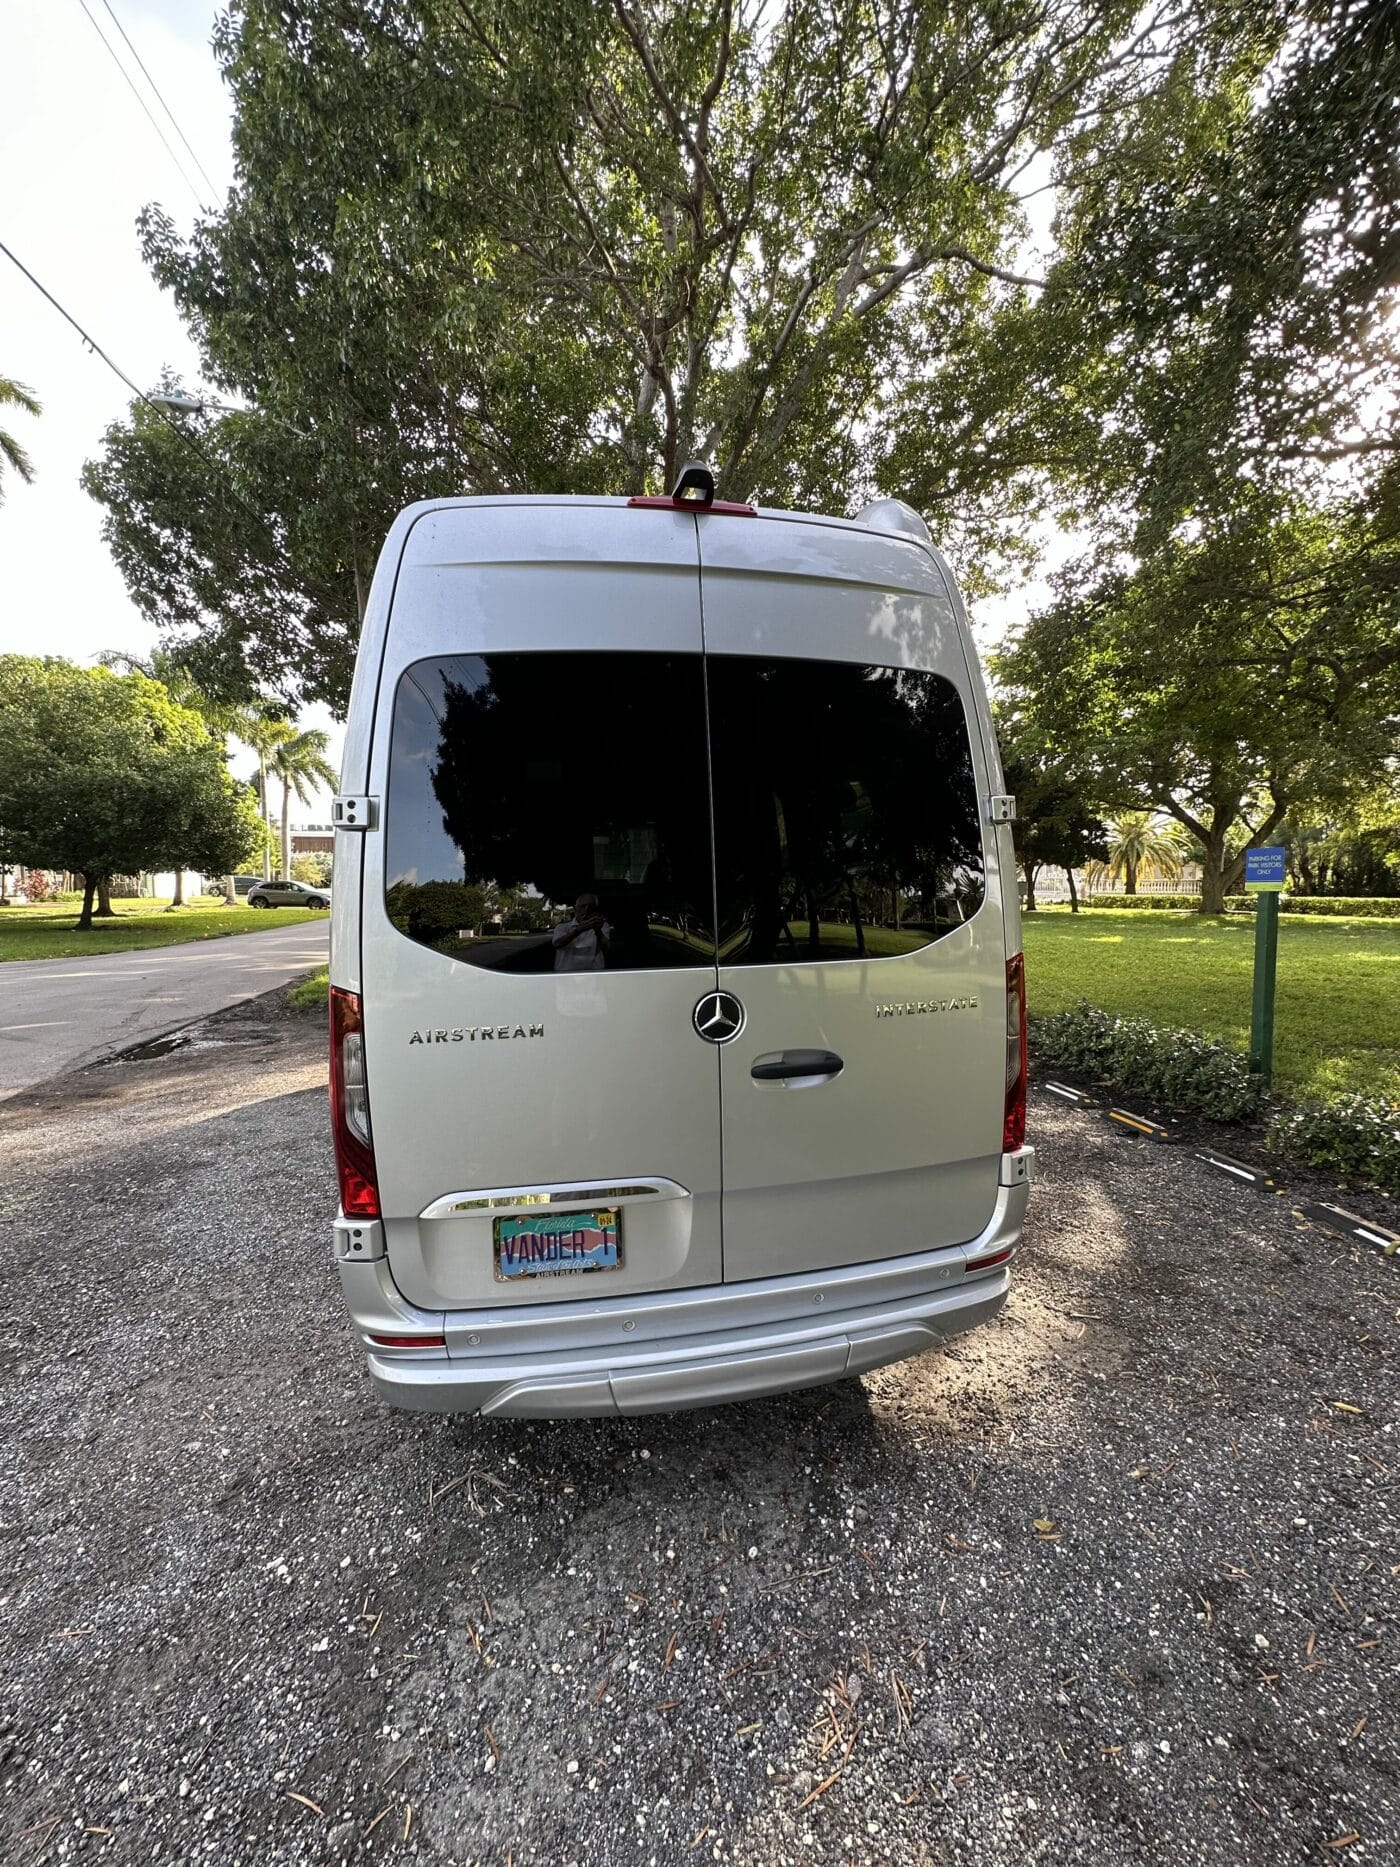 2021 19FT Airstream Motorhome For Sale In Miami Beach, Florida ...